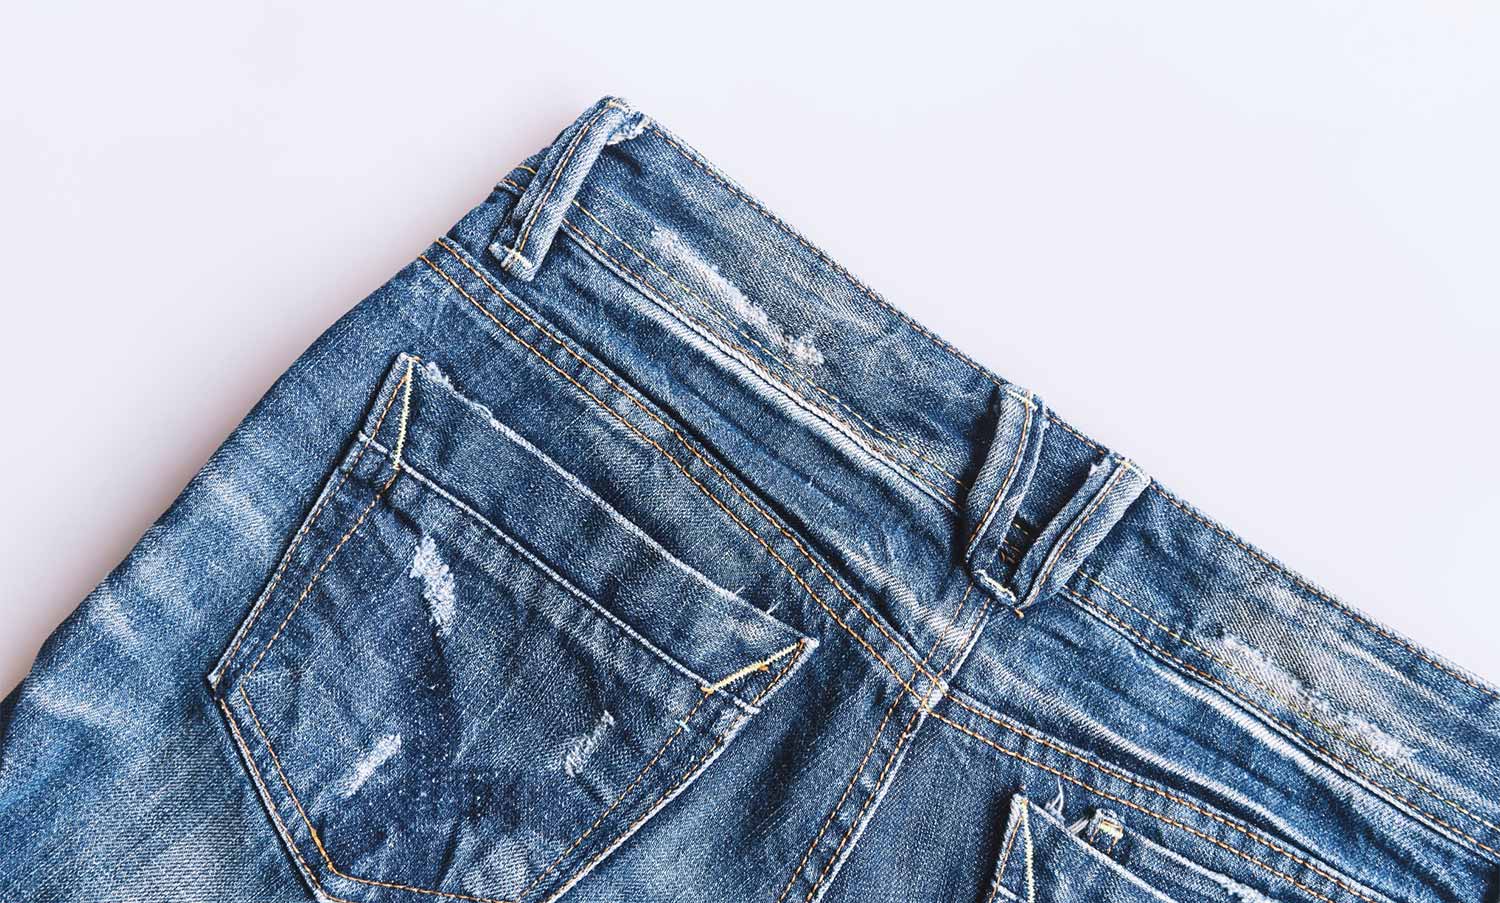 How to Care for Jeans, According to Three Experts